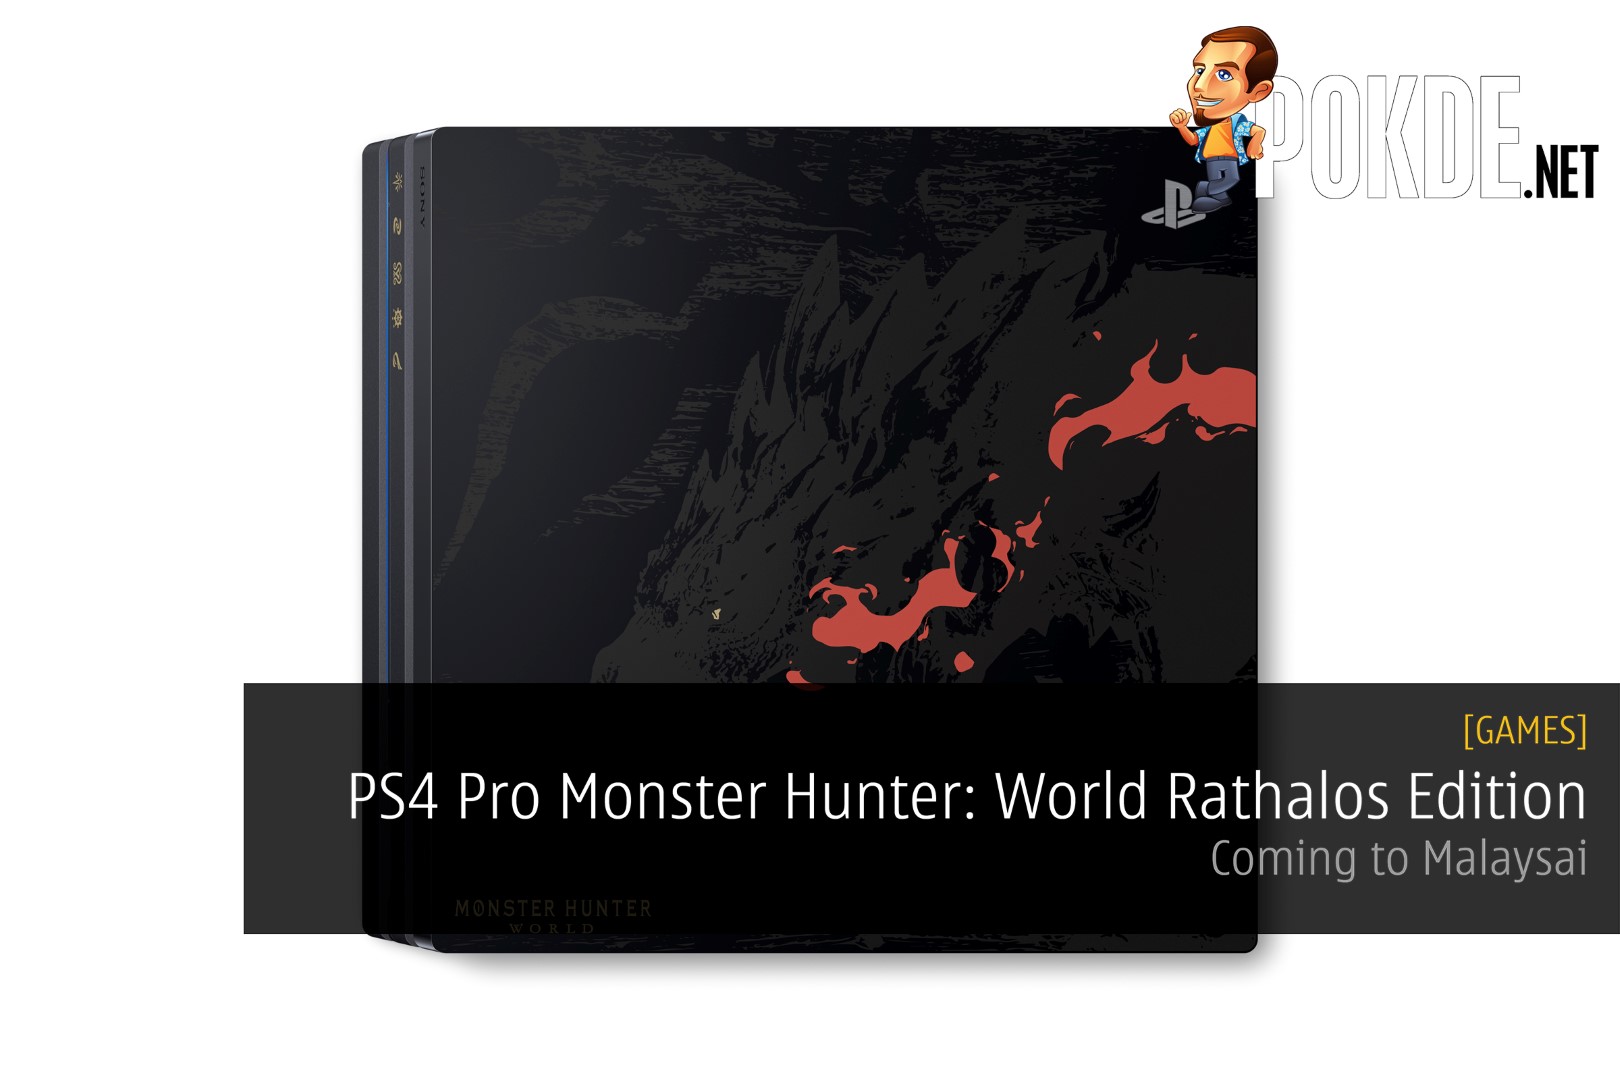 PS4 Pro Monster Hunter: World Rathalos Edition Is Coming To Malaysia! 23